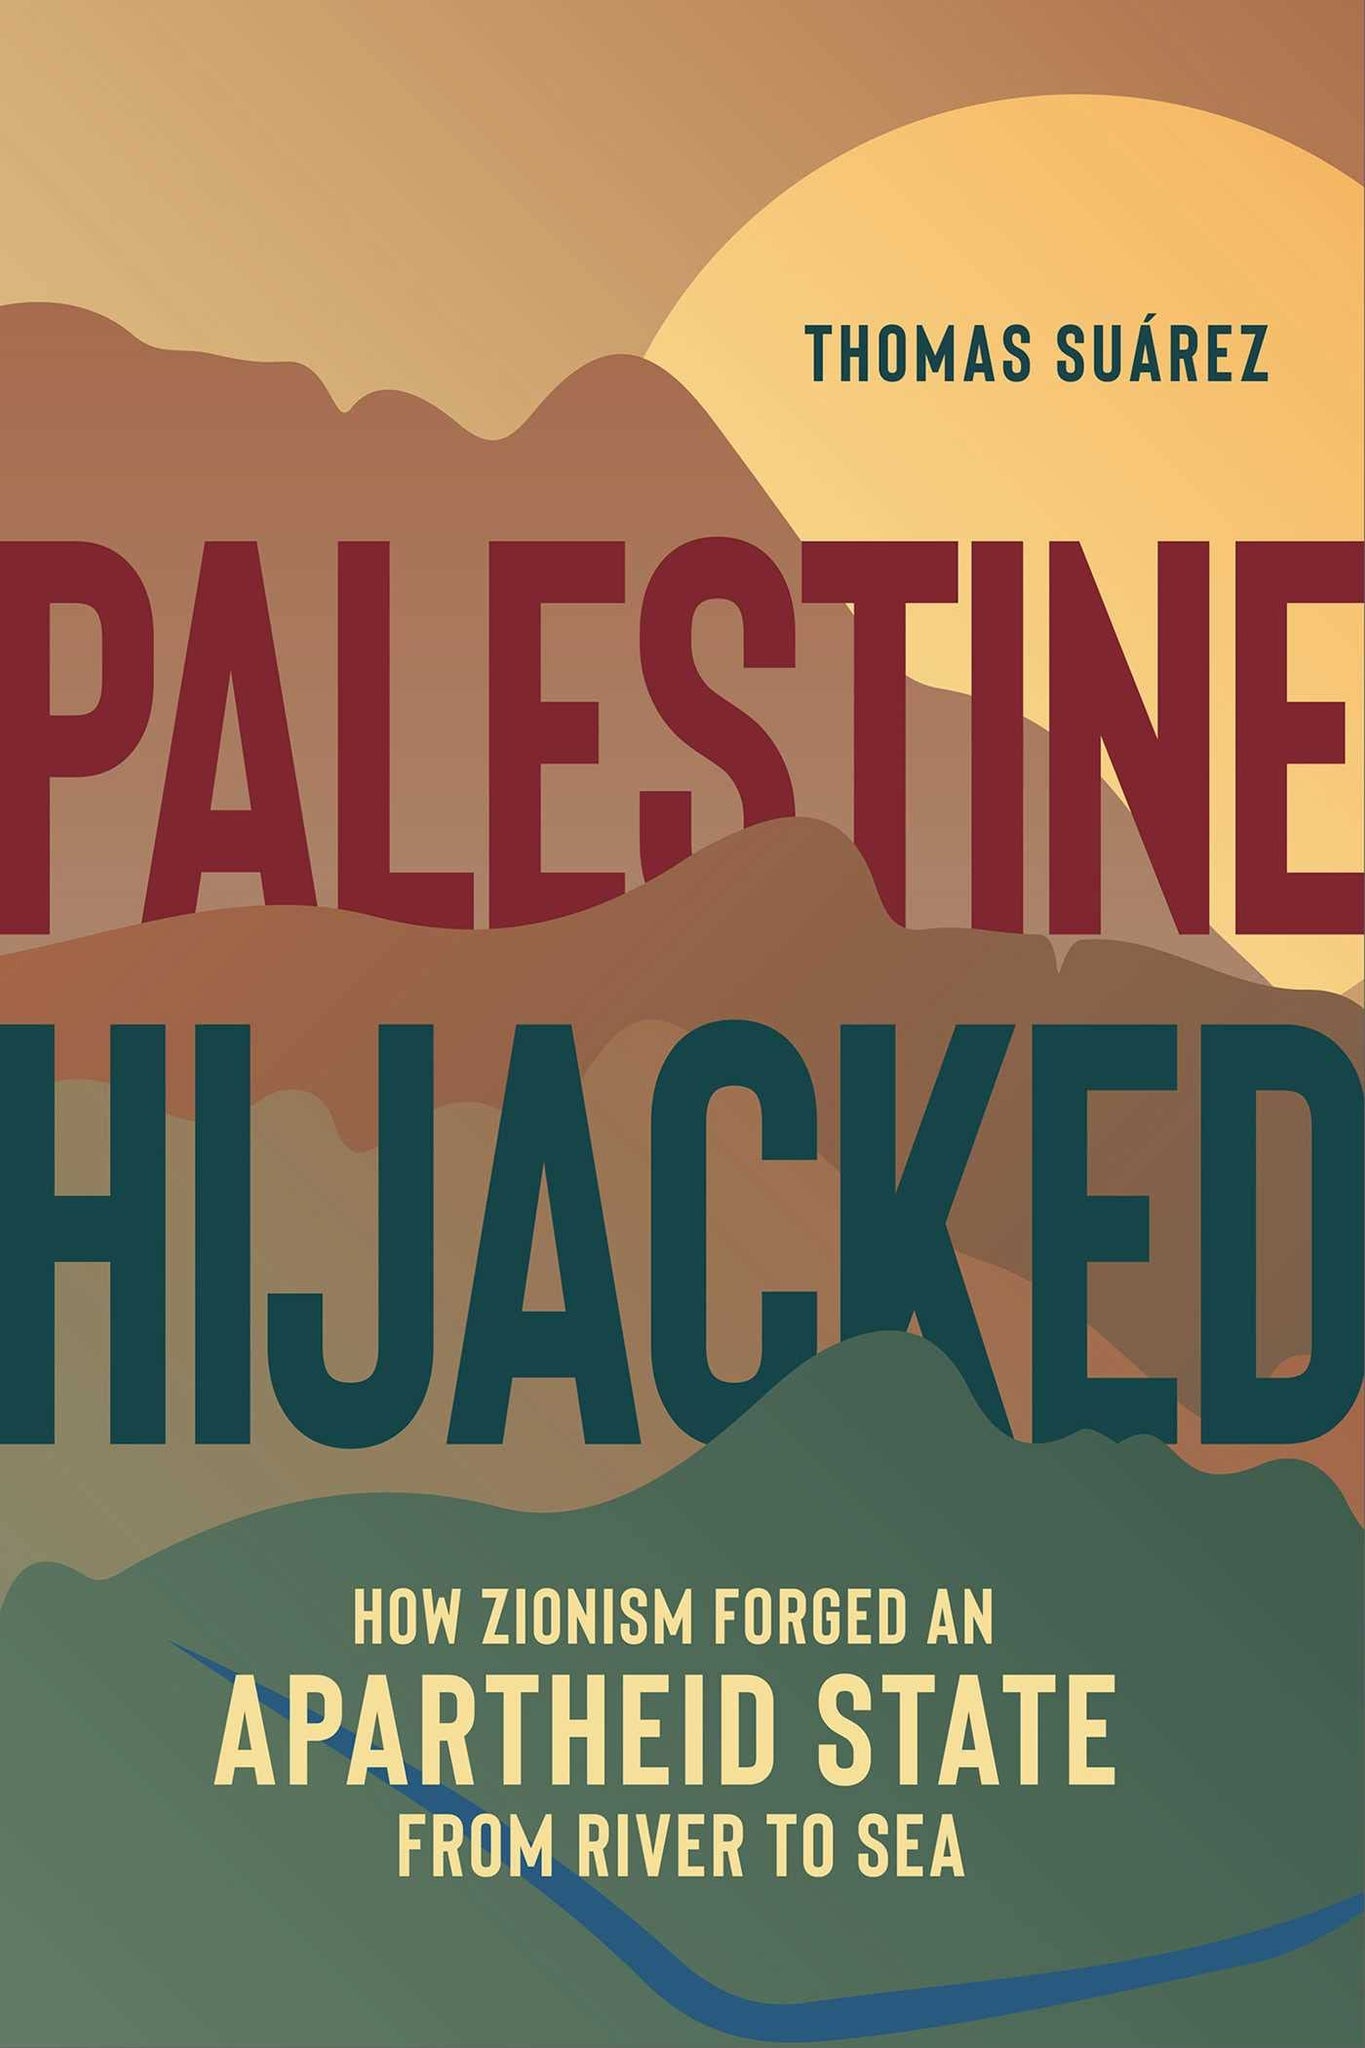 Palestine Hijacked: How Zionism Forged an Apartheid State from River to Sea (Paperback)